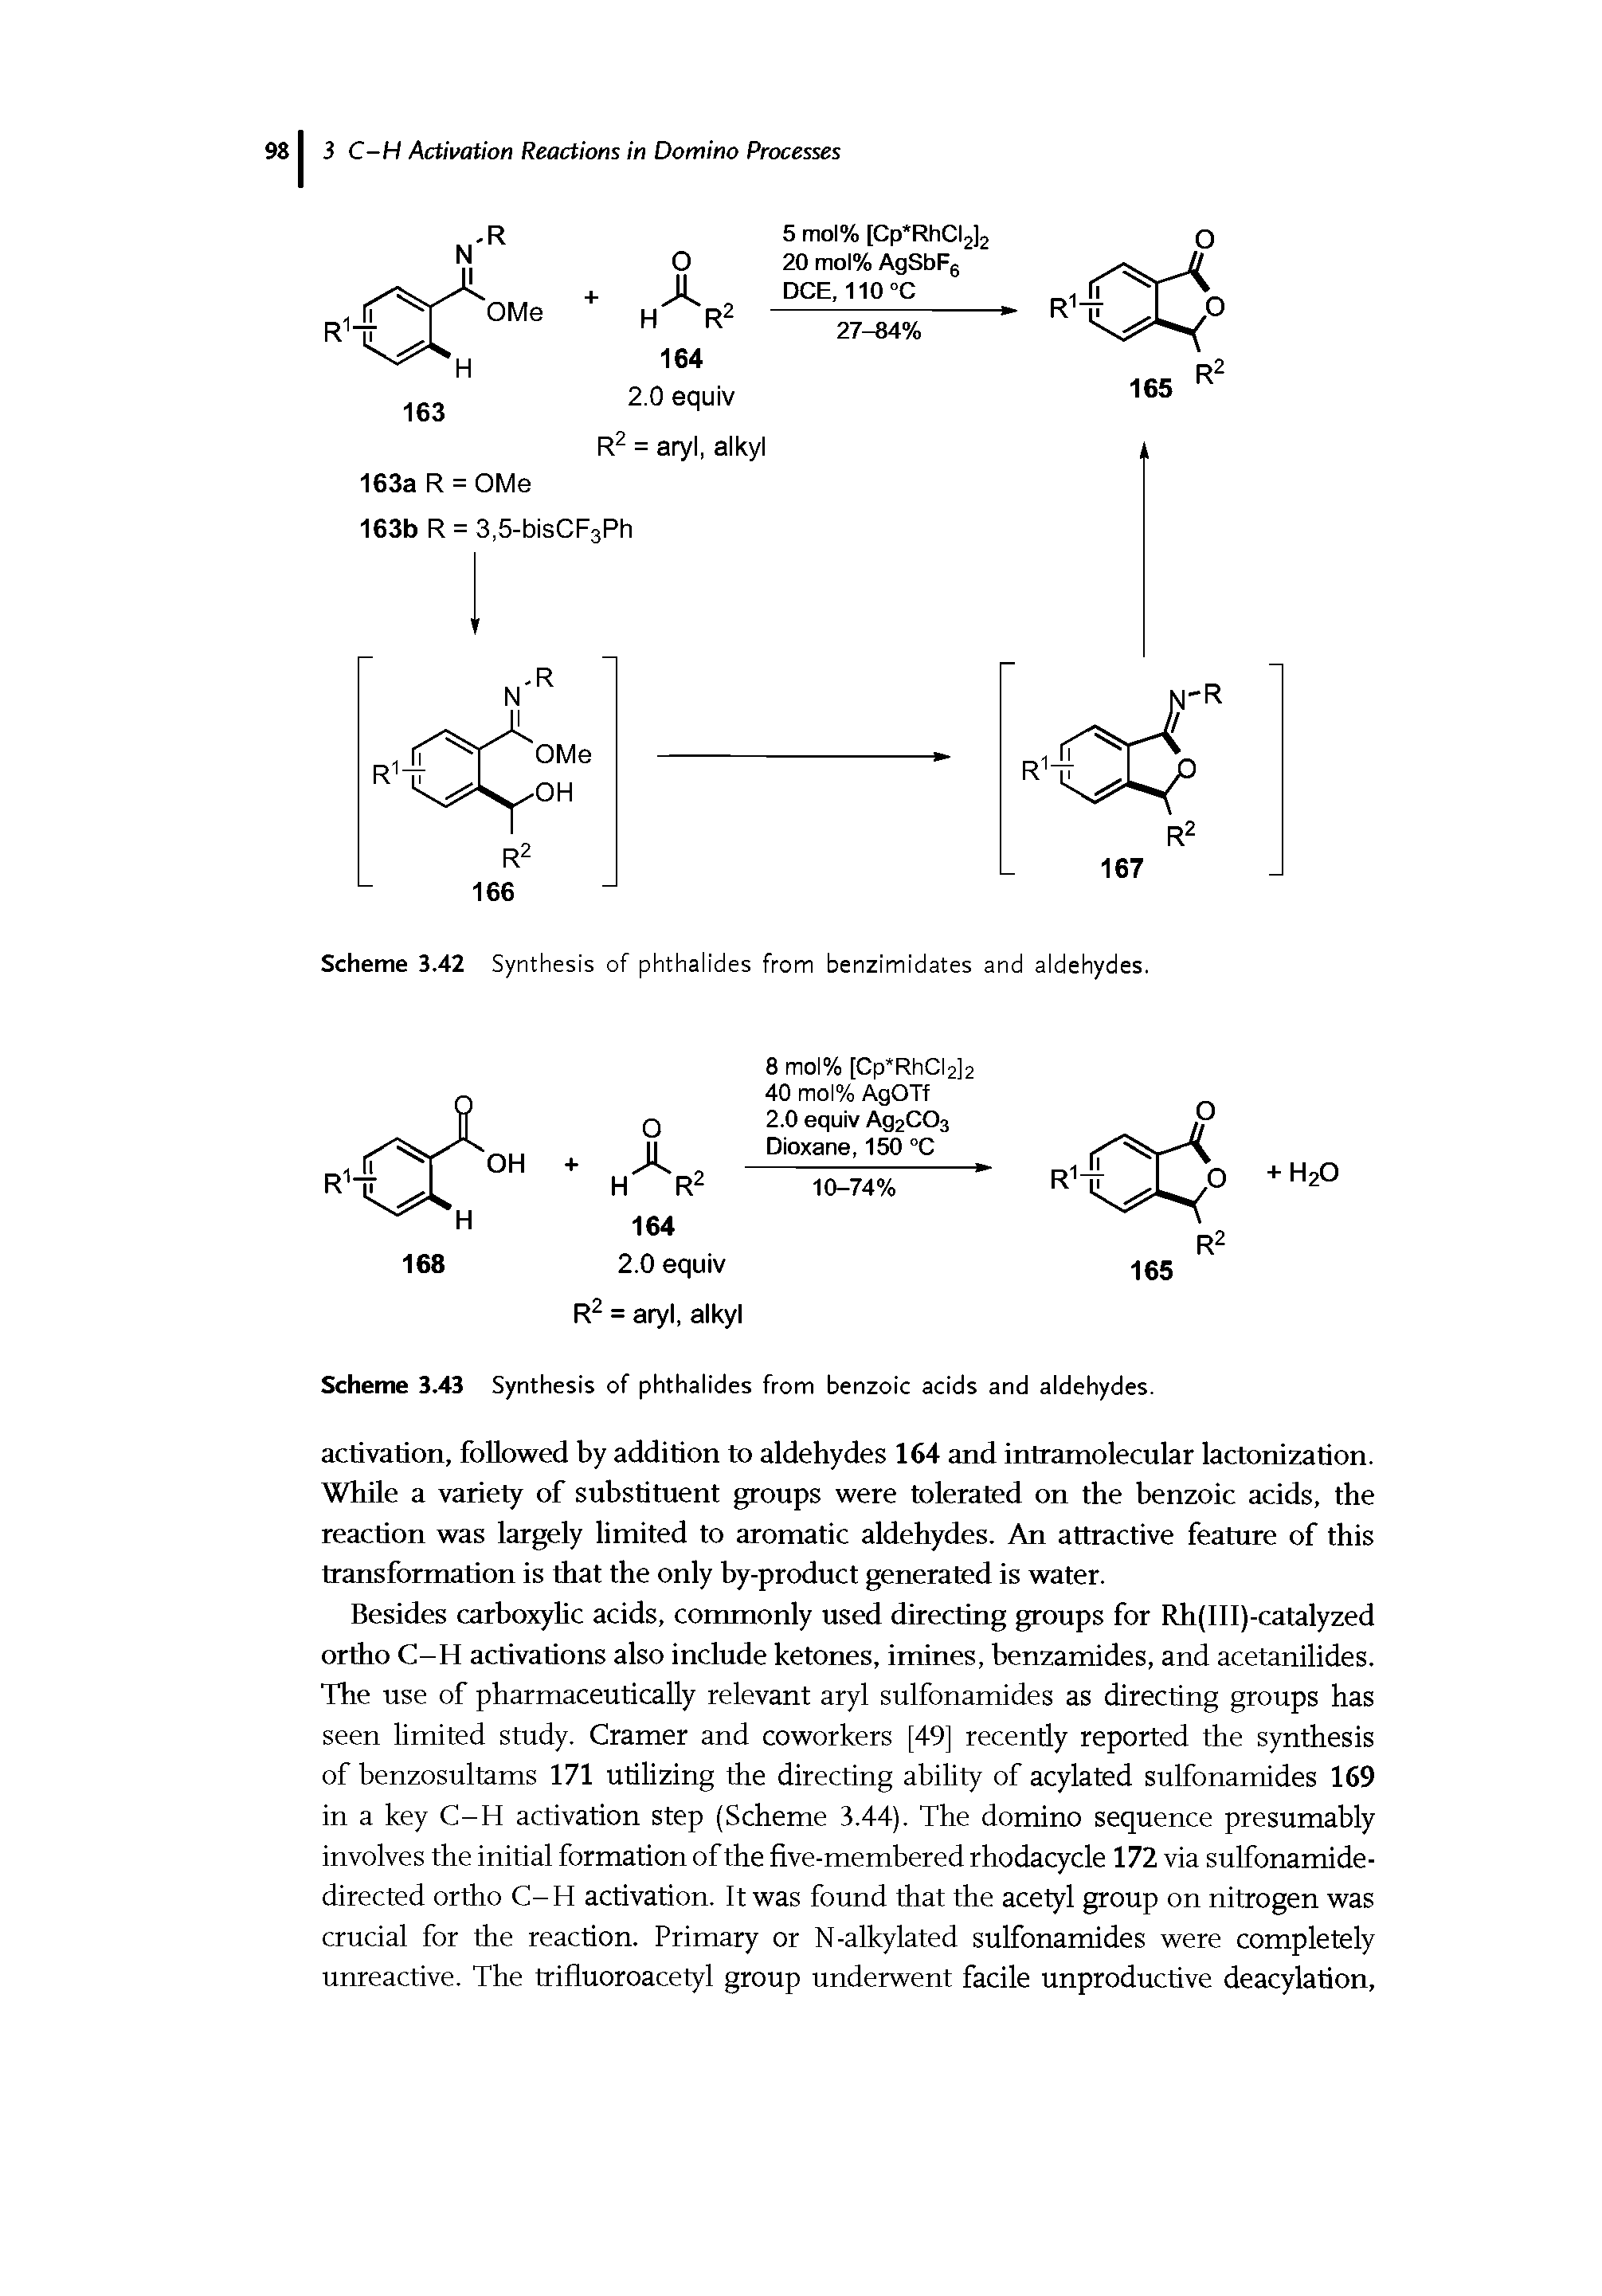 Scheme 3.43 Synthesis of phthalides from benzoic acids and aldehydes.